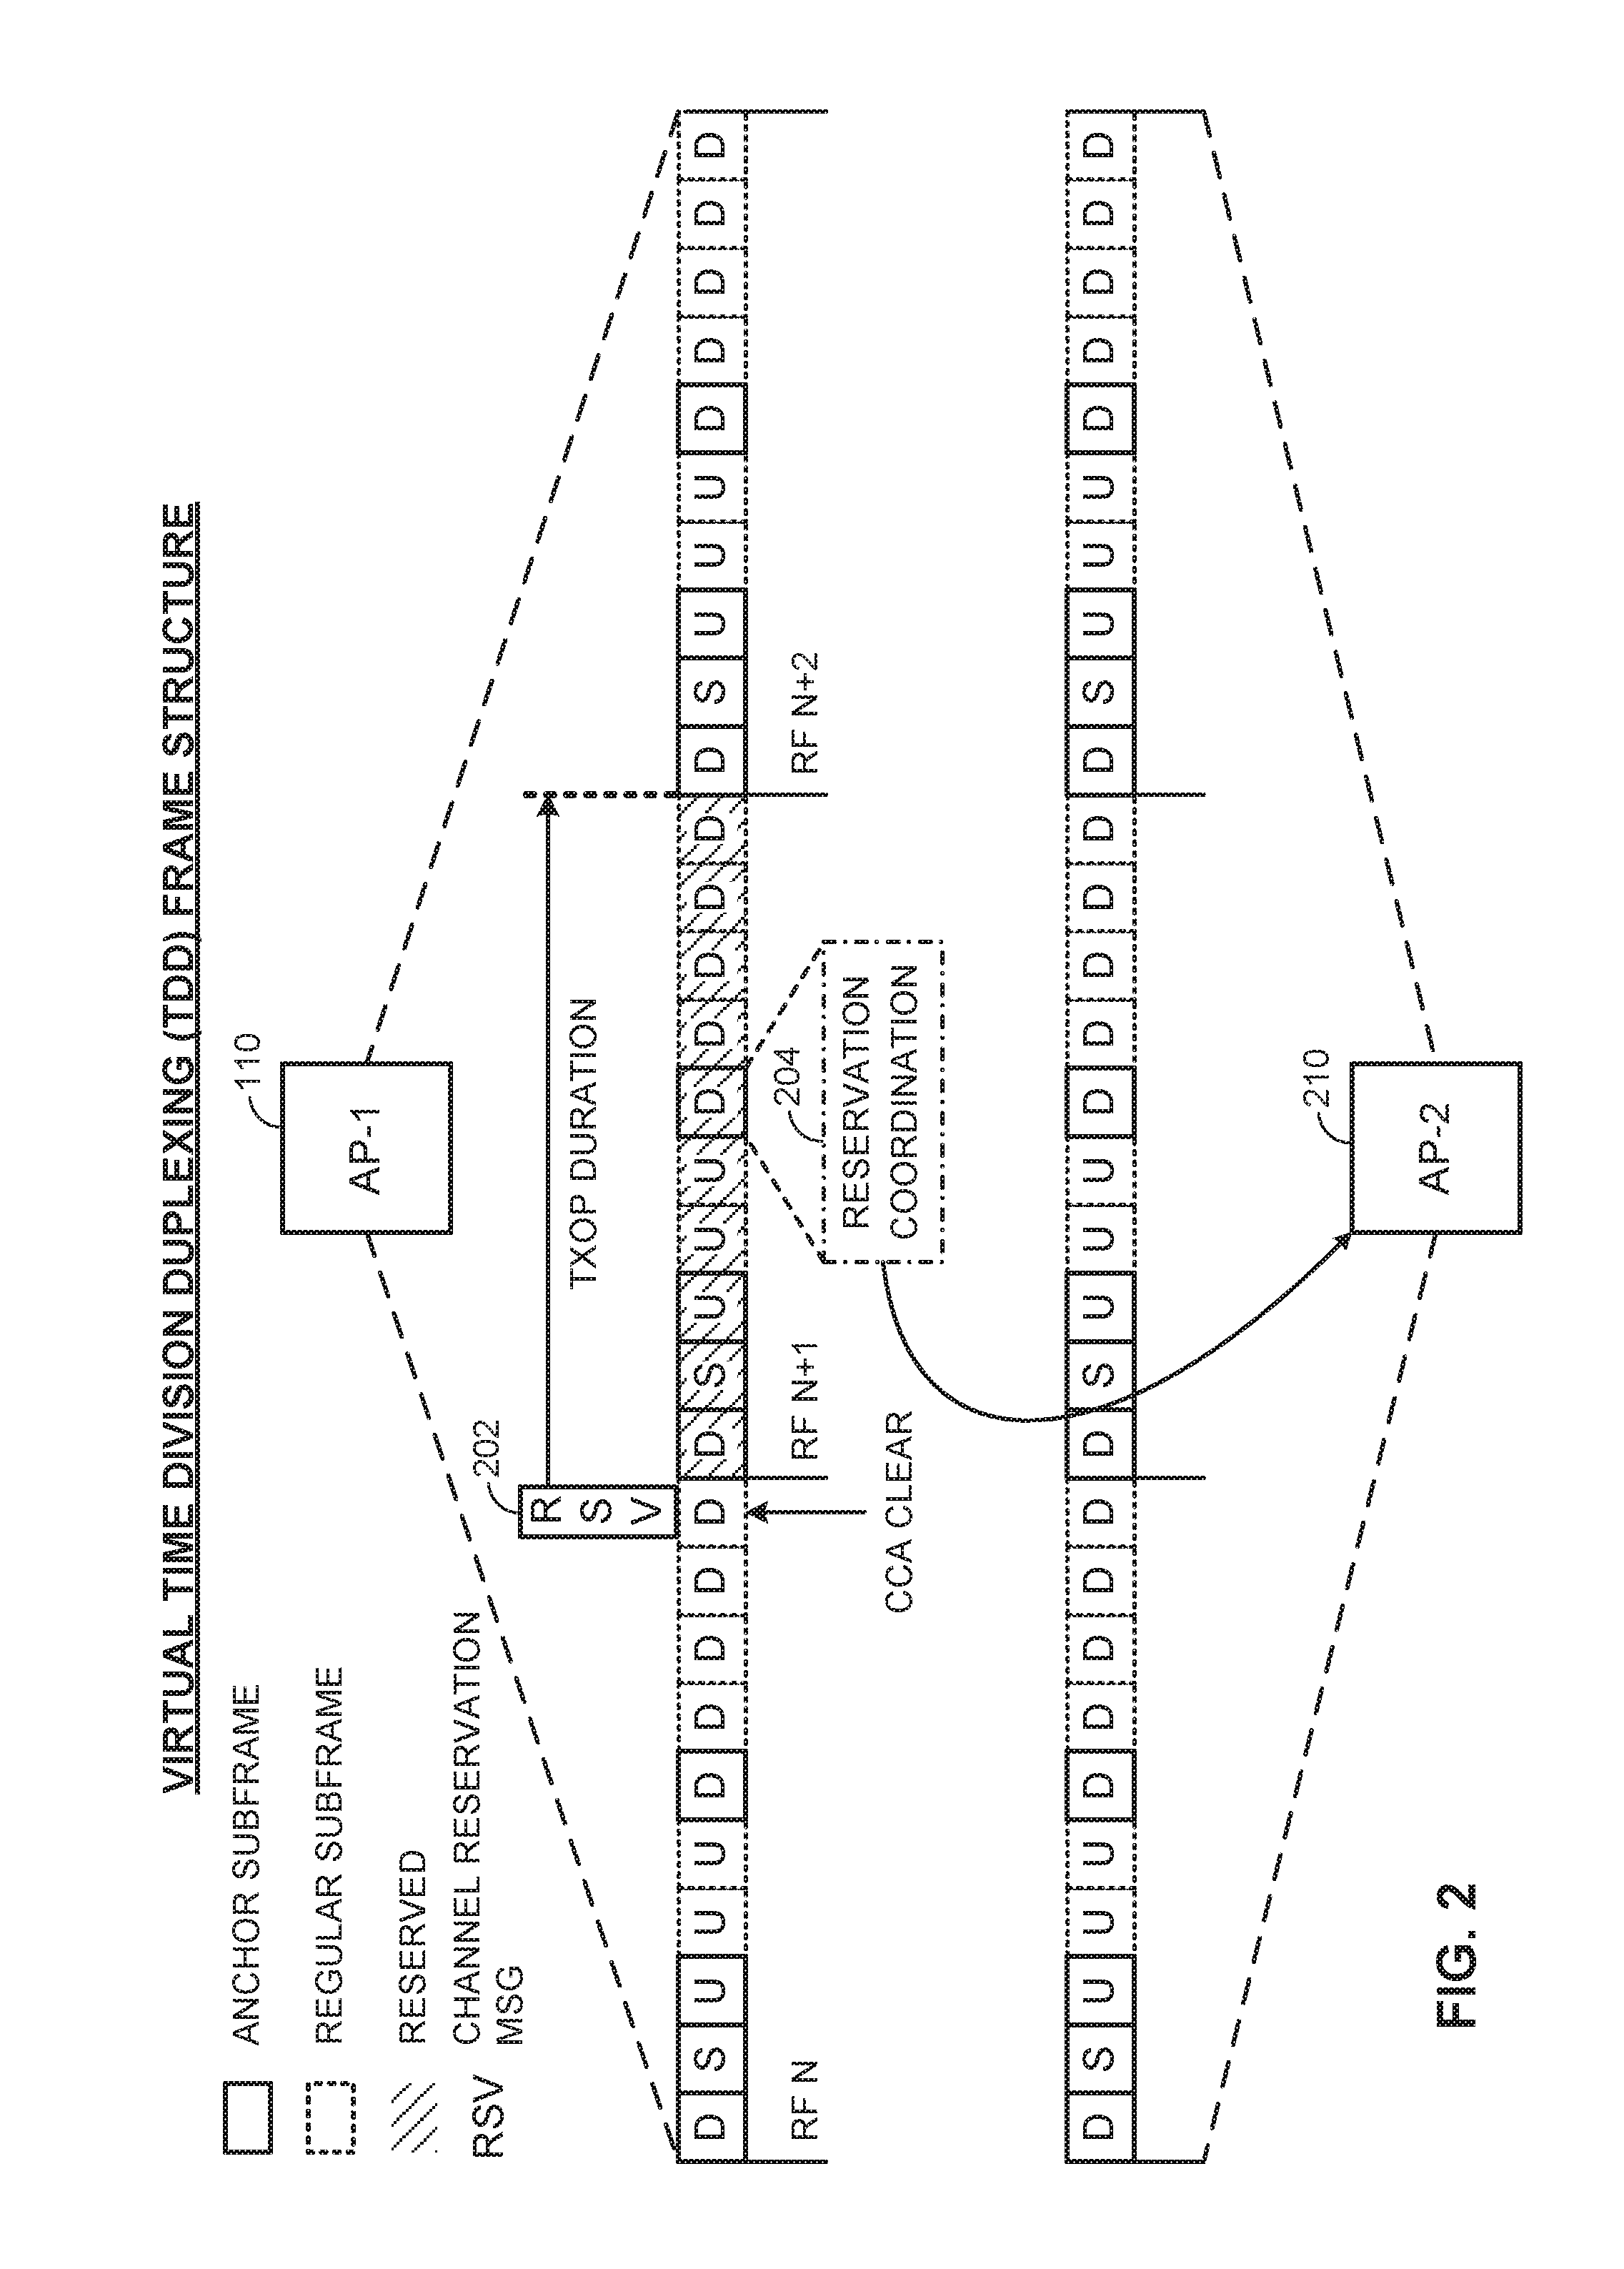 Enhanced channel reservation for co-existence on a shared communication medium